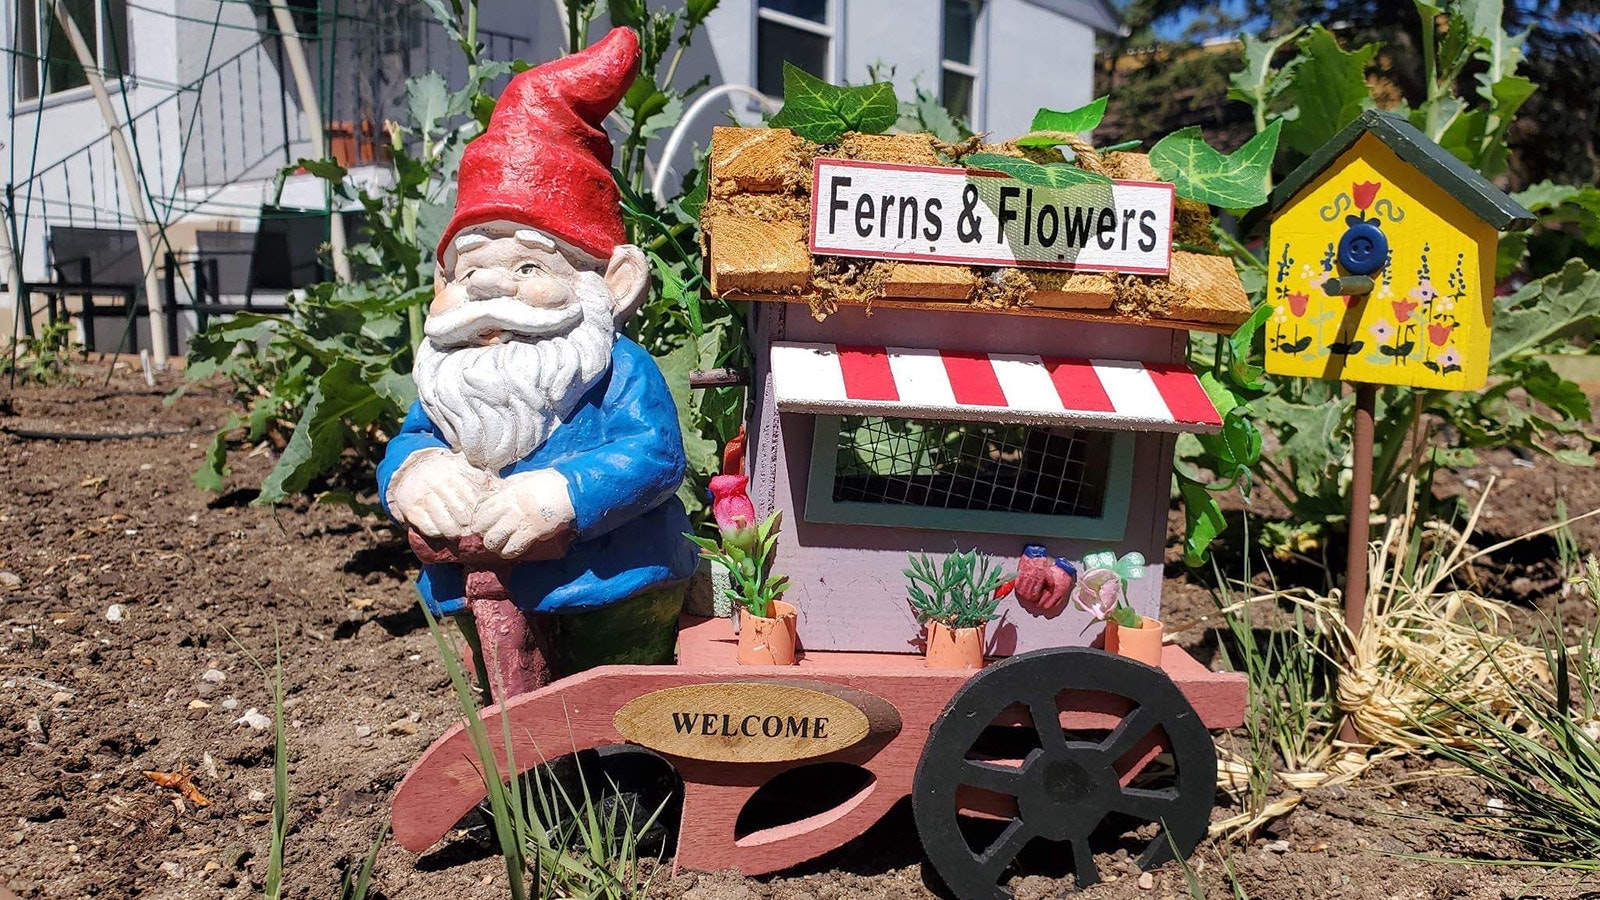 Mr. Gnome was a colorful fixture in his Laramie garden, as seen in this 2022 photo.